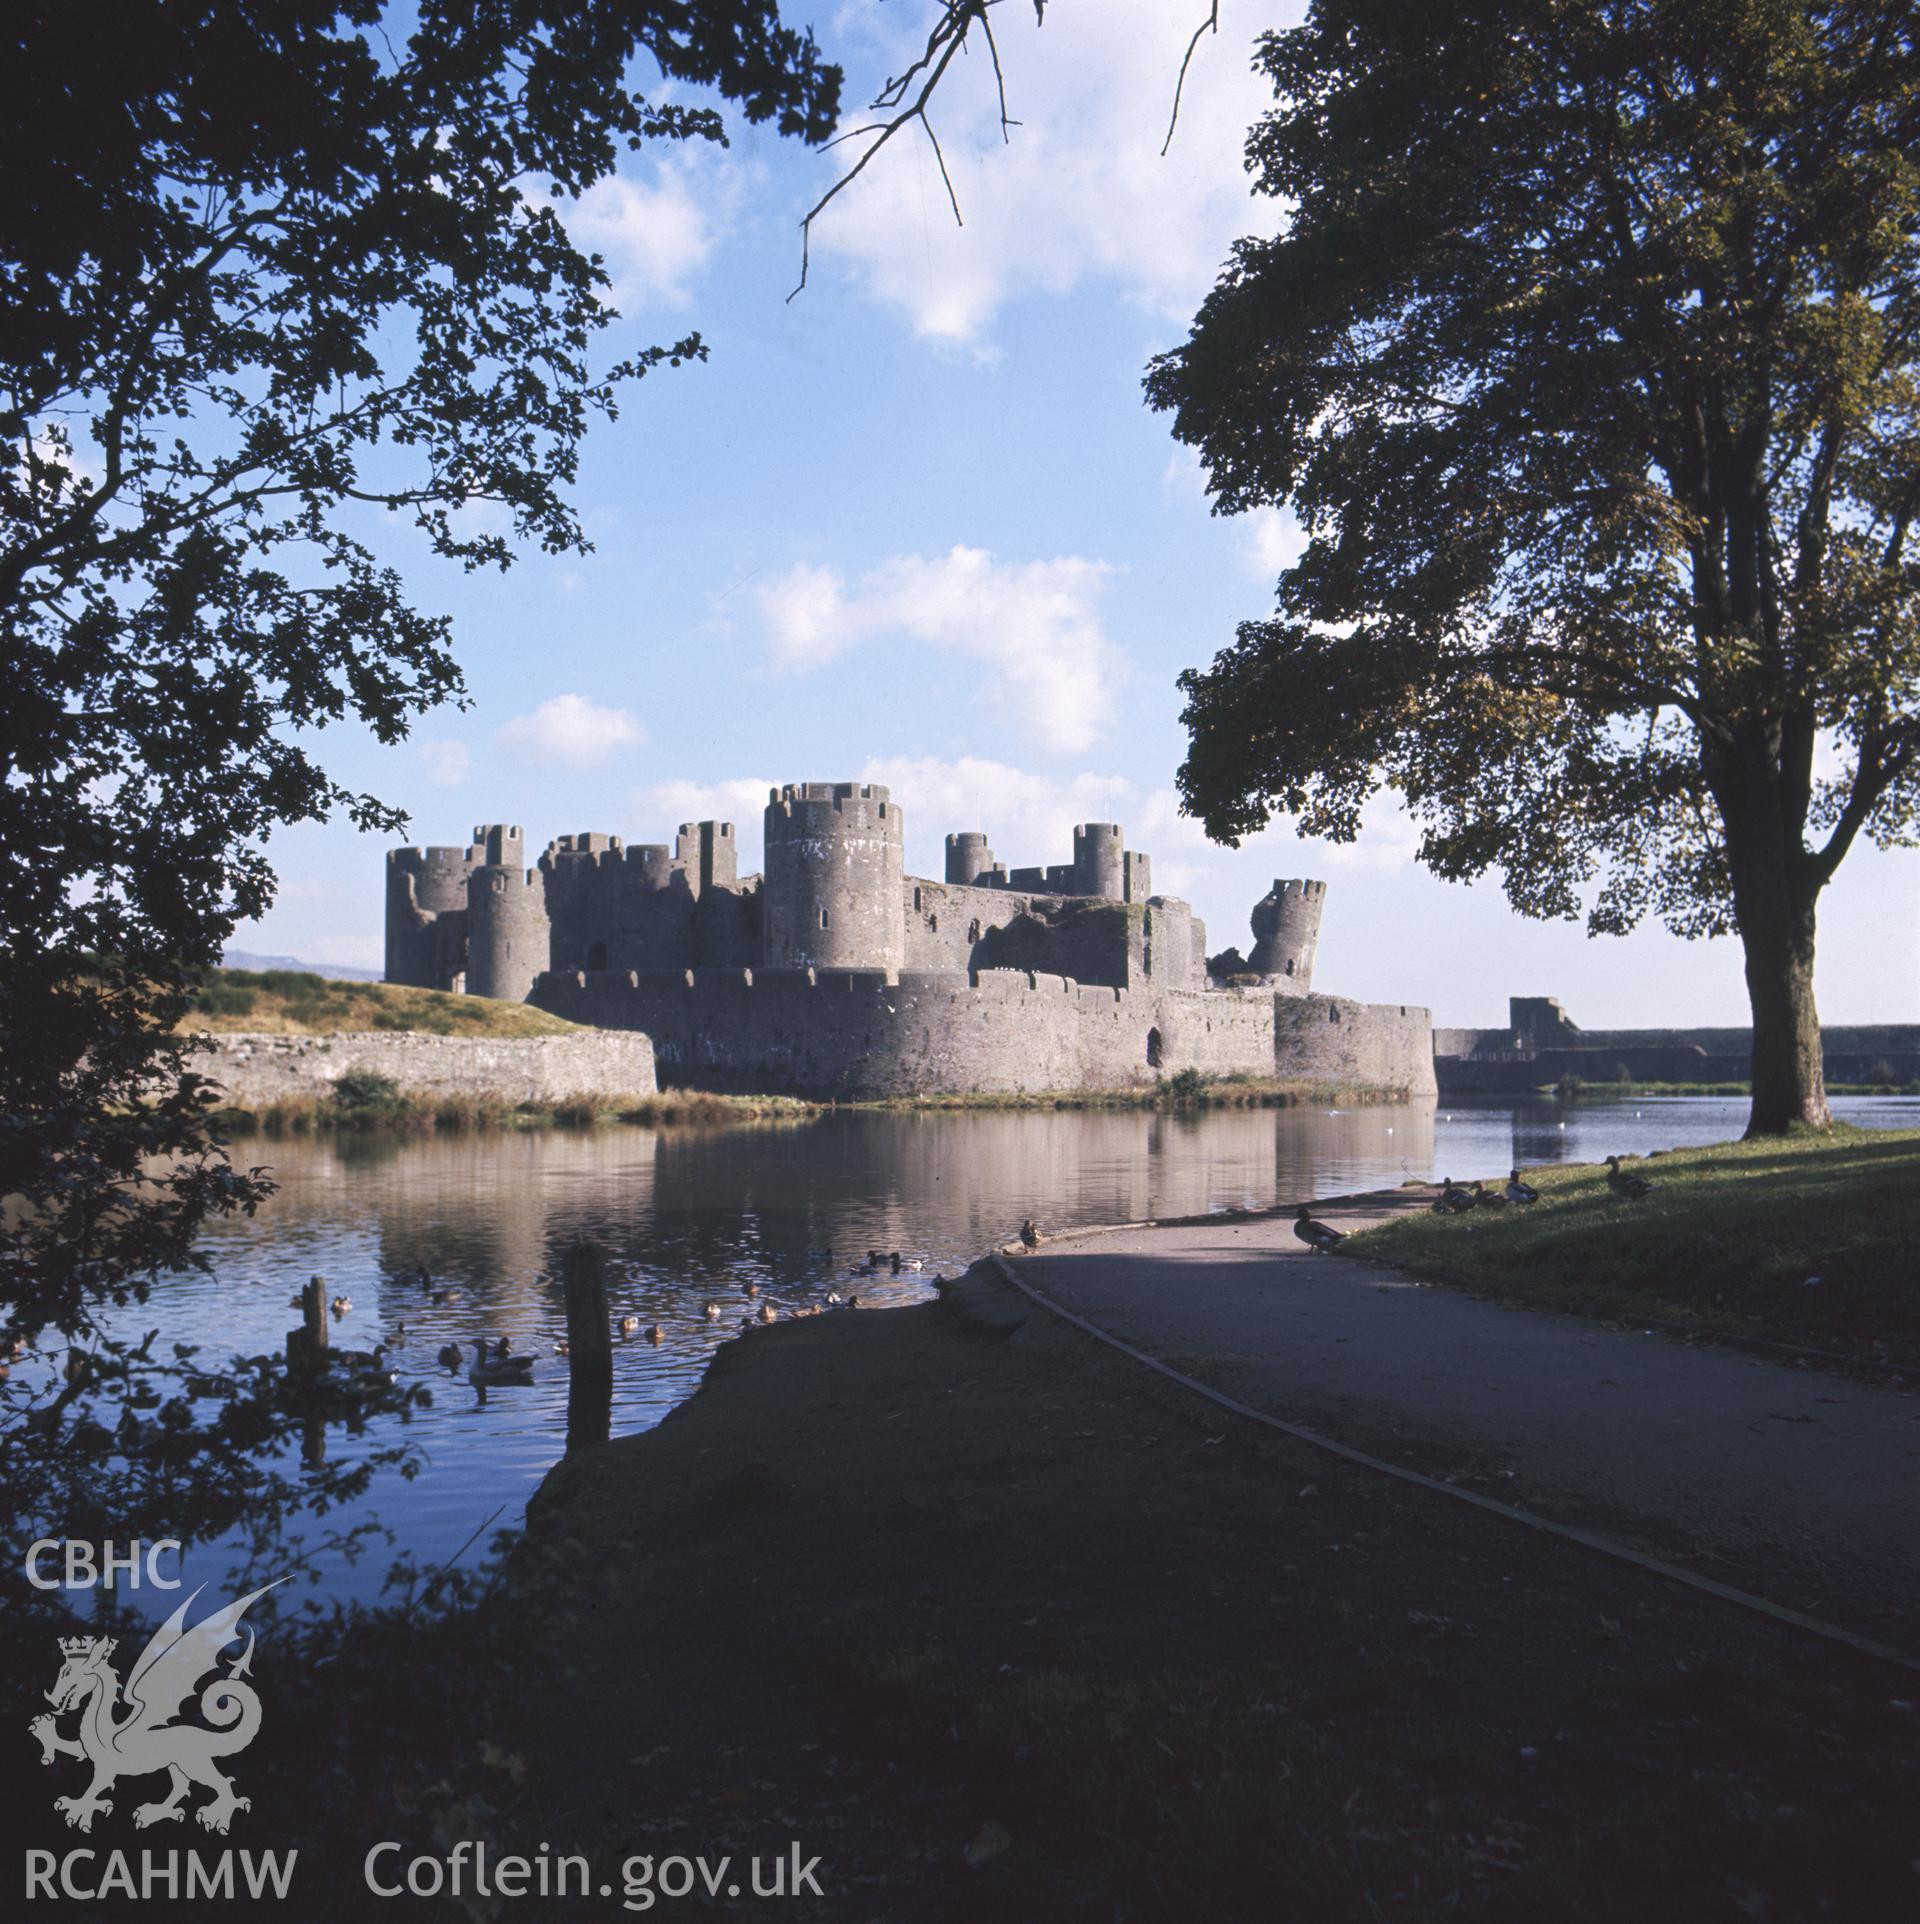 1 colour transparency showing view of Caerphilly Castle, undated; collated by the former Central Office of Information.